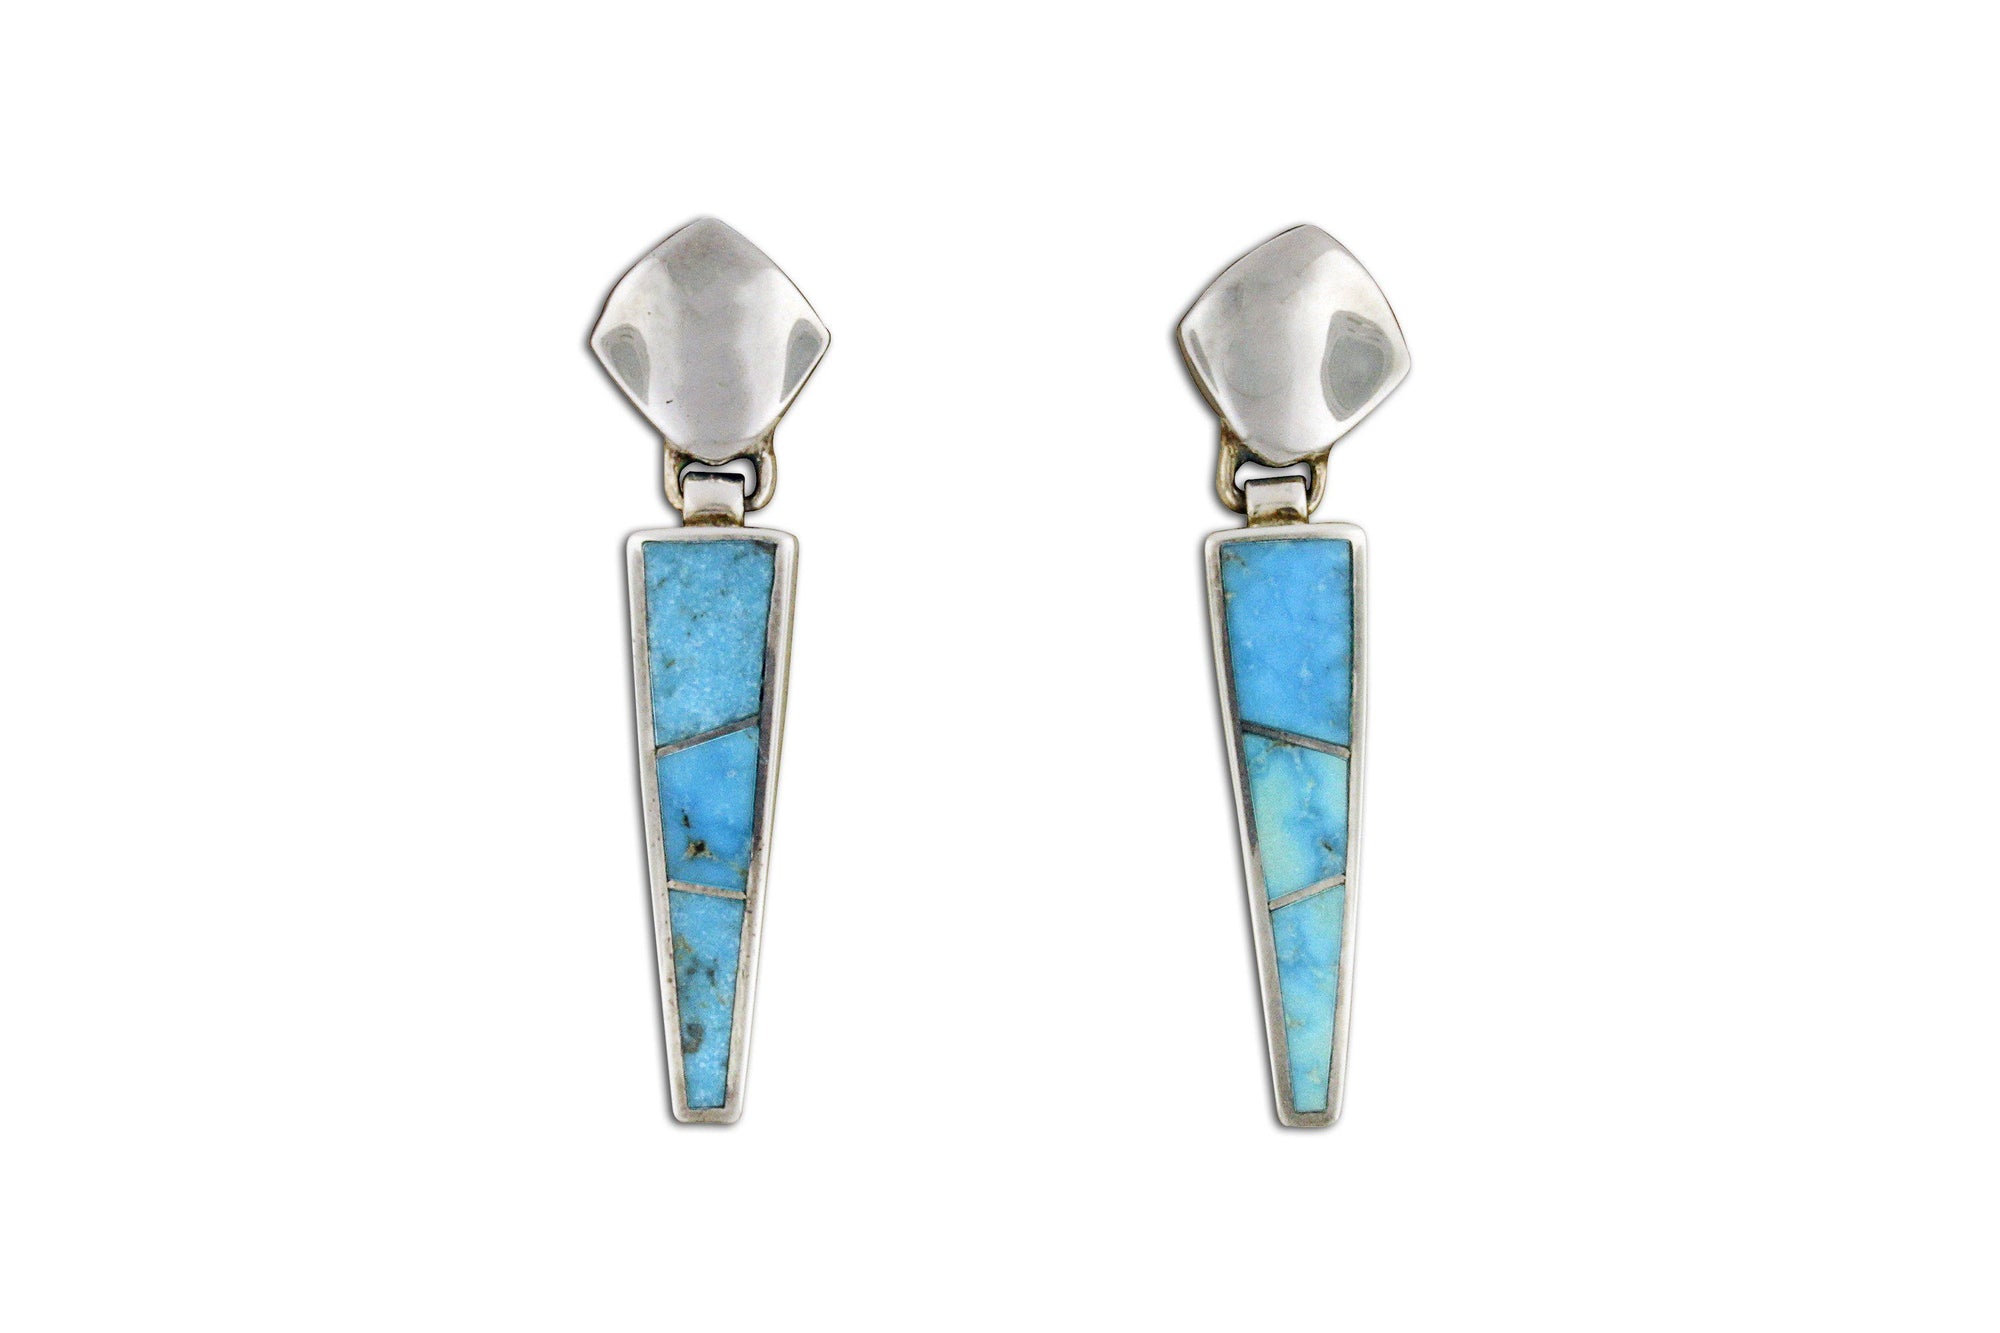 Native American Jewelry - David Rosales Inlaid Turquoise Earrings